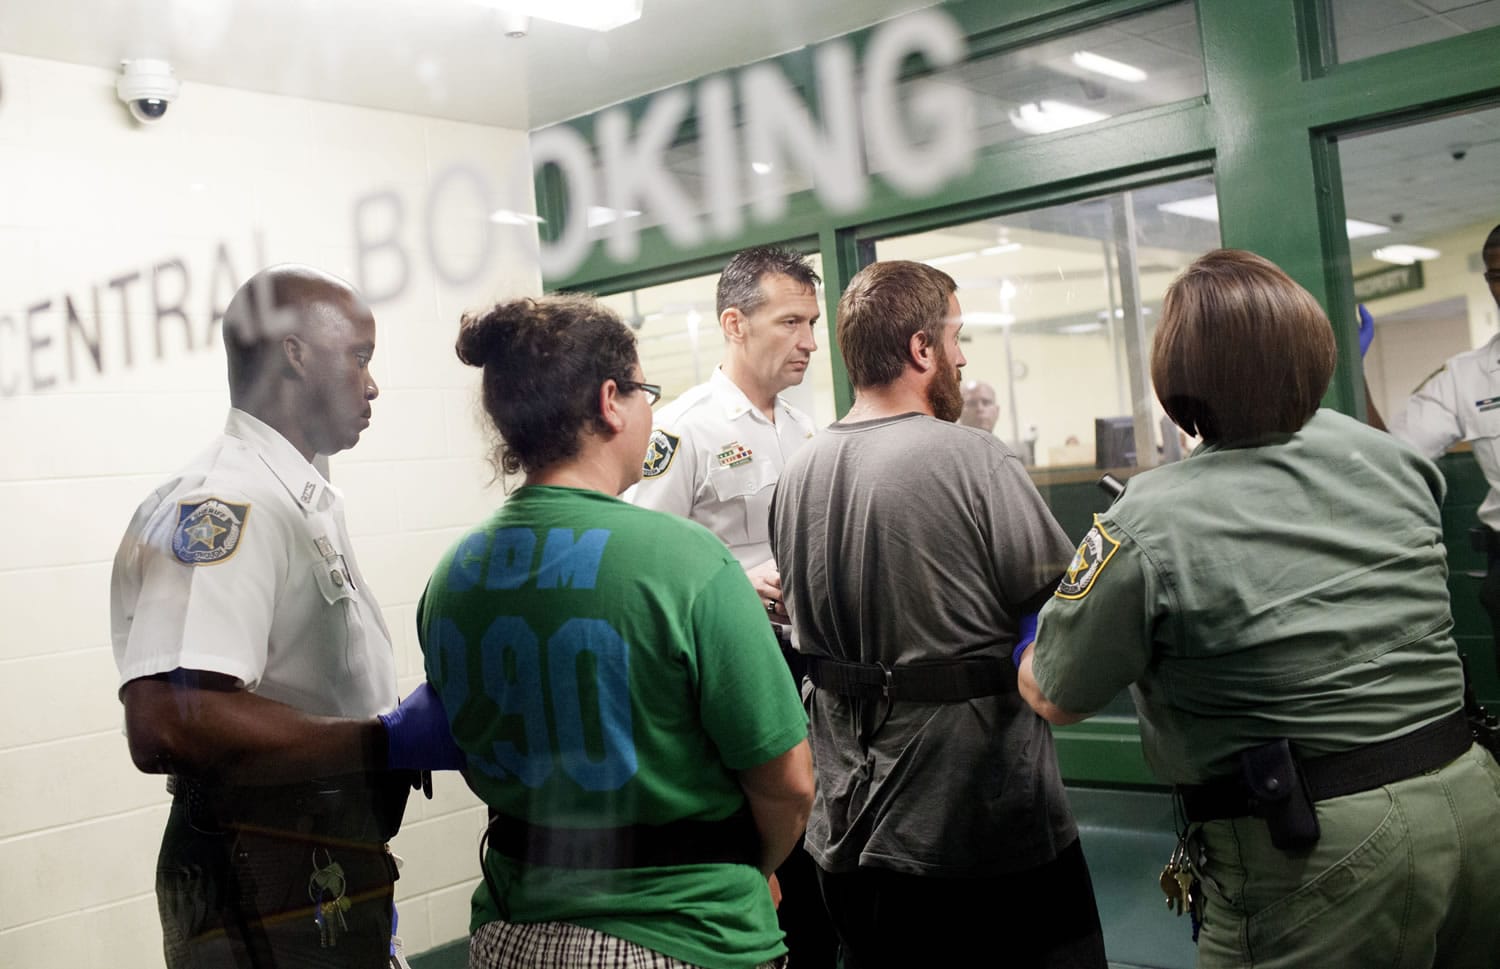 Sharyn Hakken, second from left, and Joshua Hakken, are taken into booking by Hillsborough County Sheriff Officers at the Orient Road Jail after being brought in from Cuba early Wednesday morning.